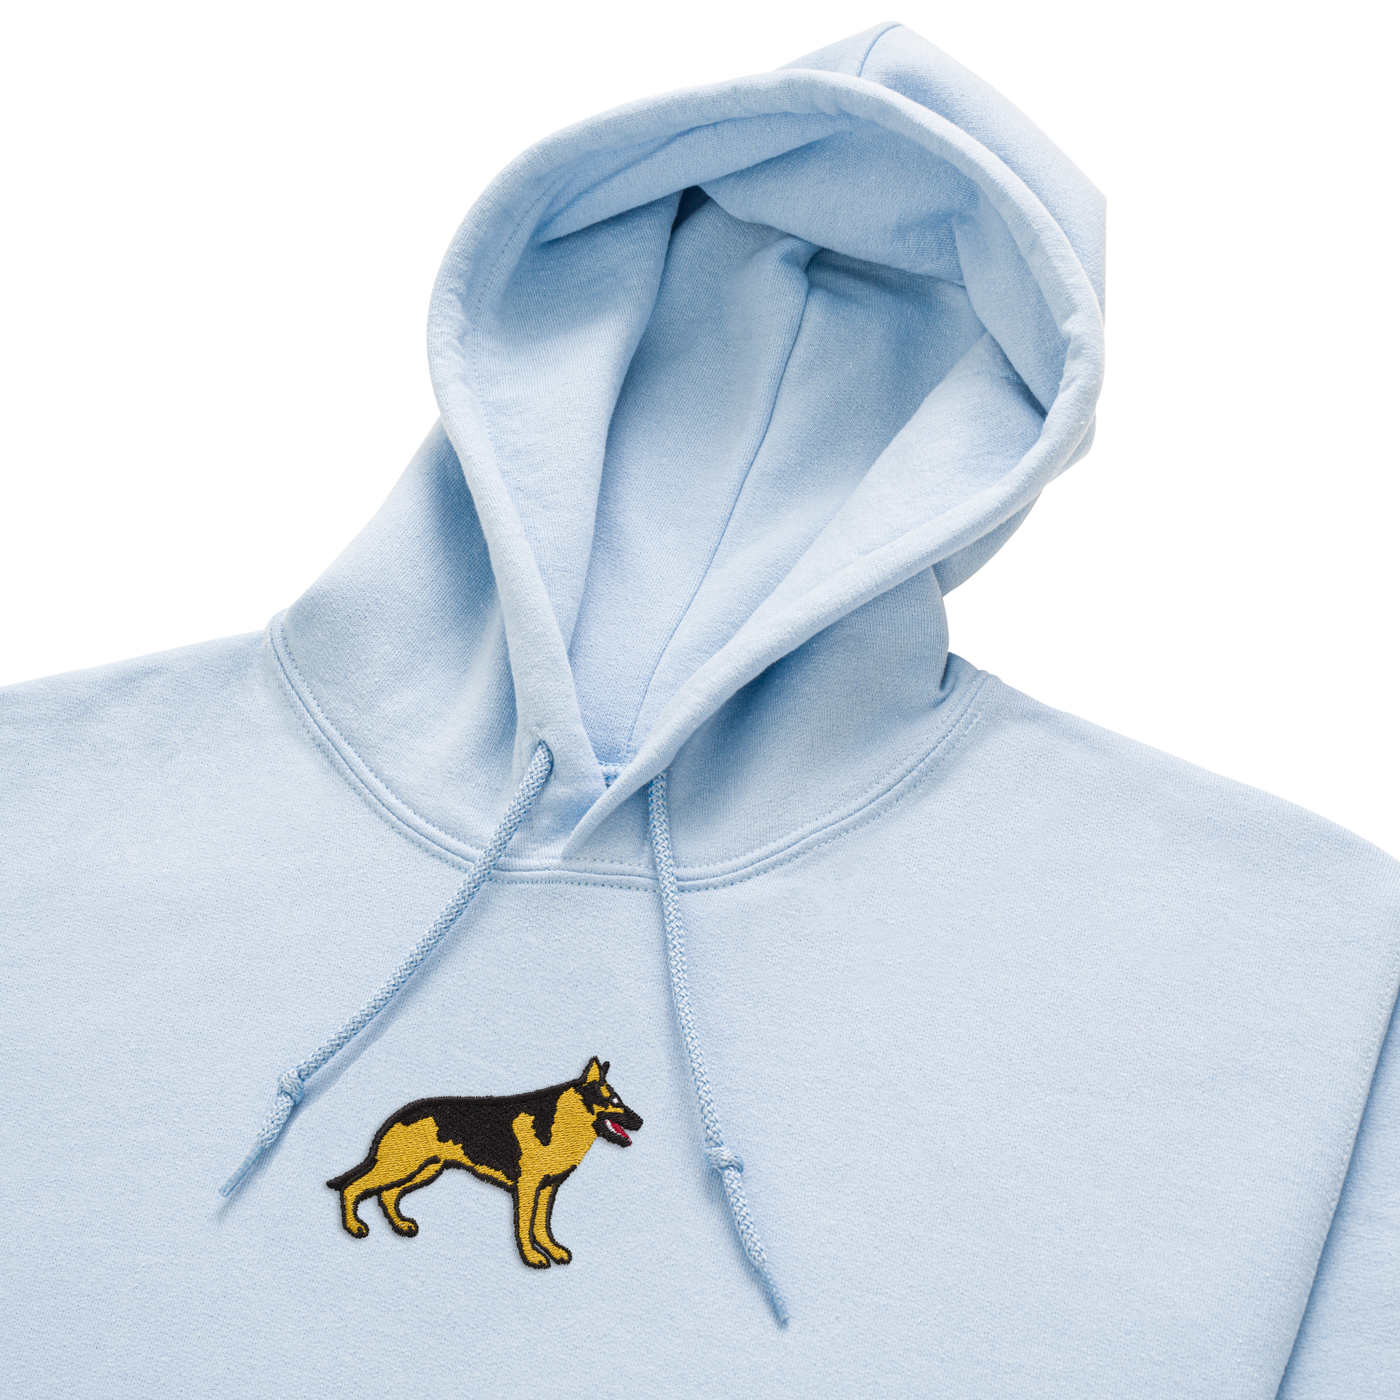 Bobby's Planet Women's Embroidered German Shepherd Hoodie from Paws Dog Cat Animals Collection in Light Blue Color#color_light-blue